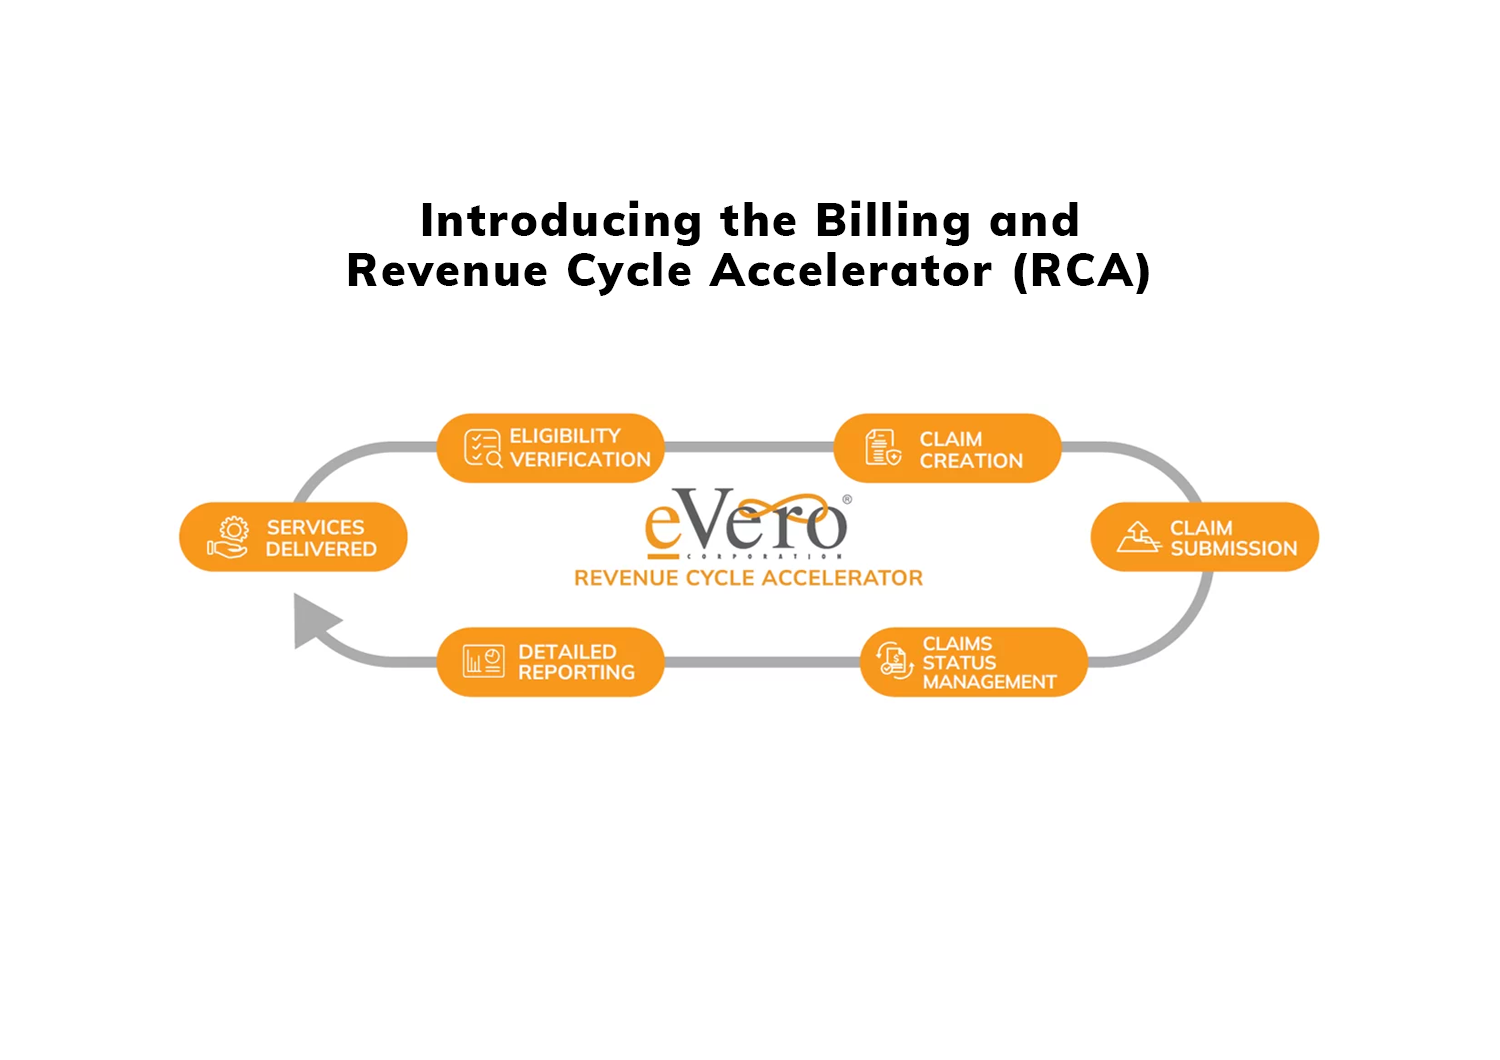 eVero Billing and Revenue Cycle Accelerator